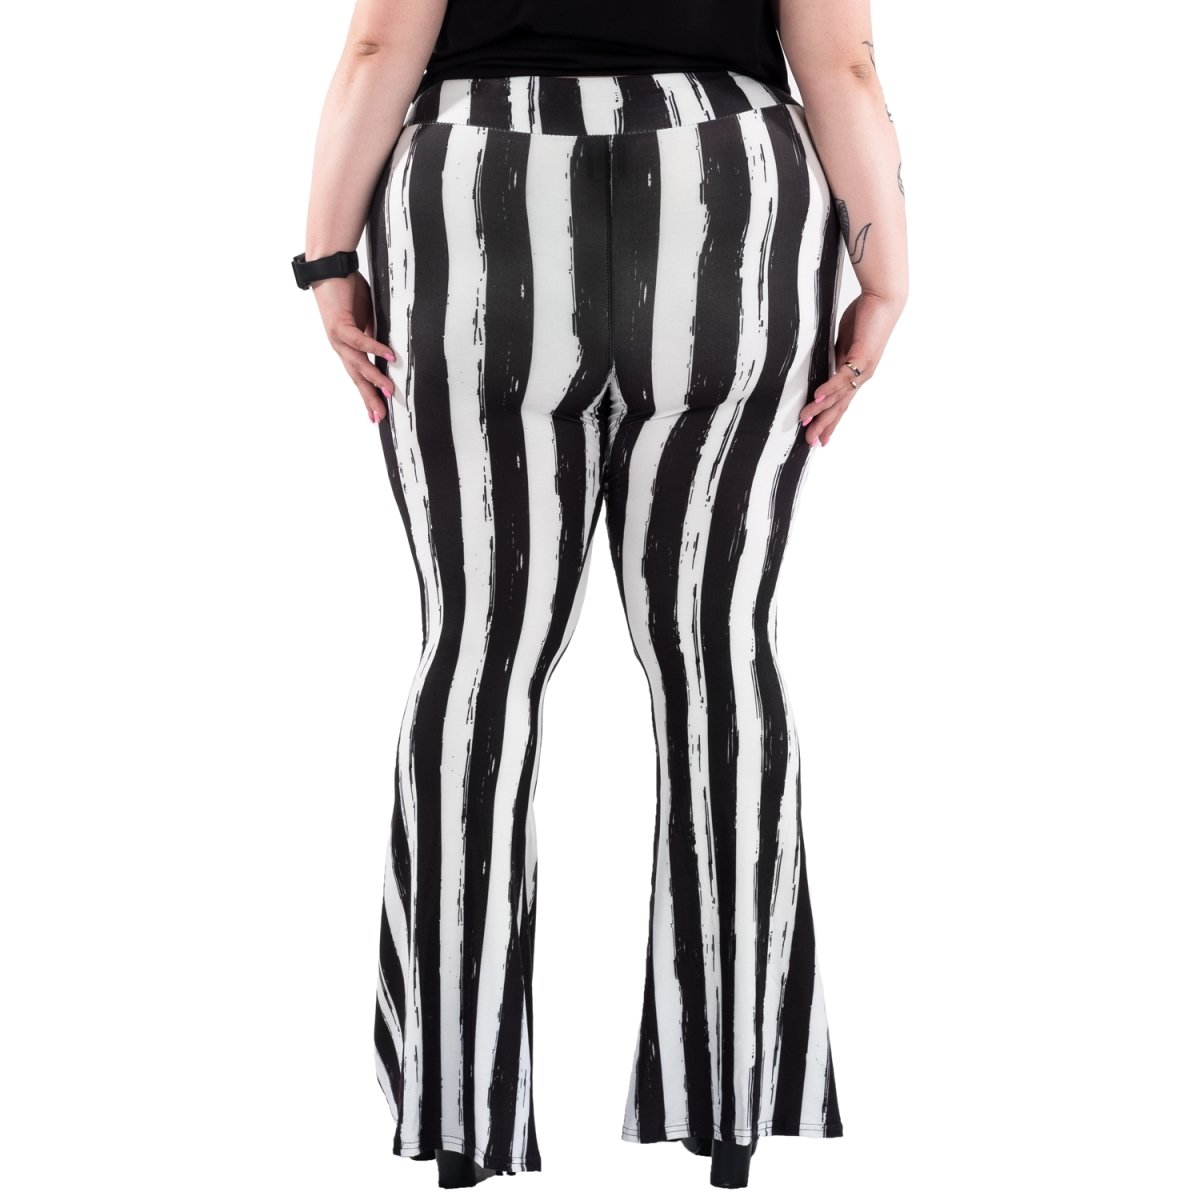 Too Fast | Distressed Black and White Striped Flare Pant Hellz Bellz